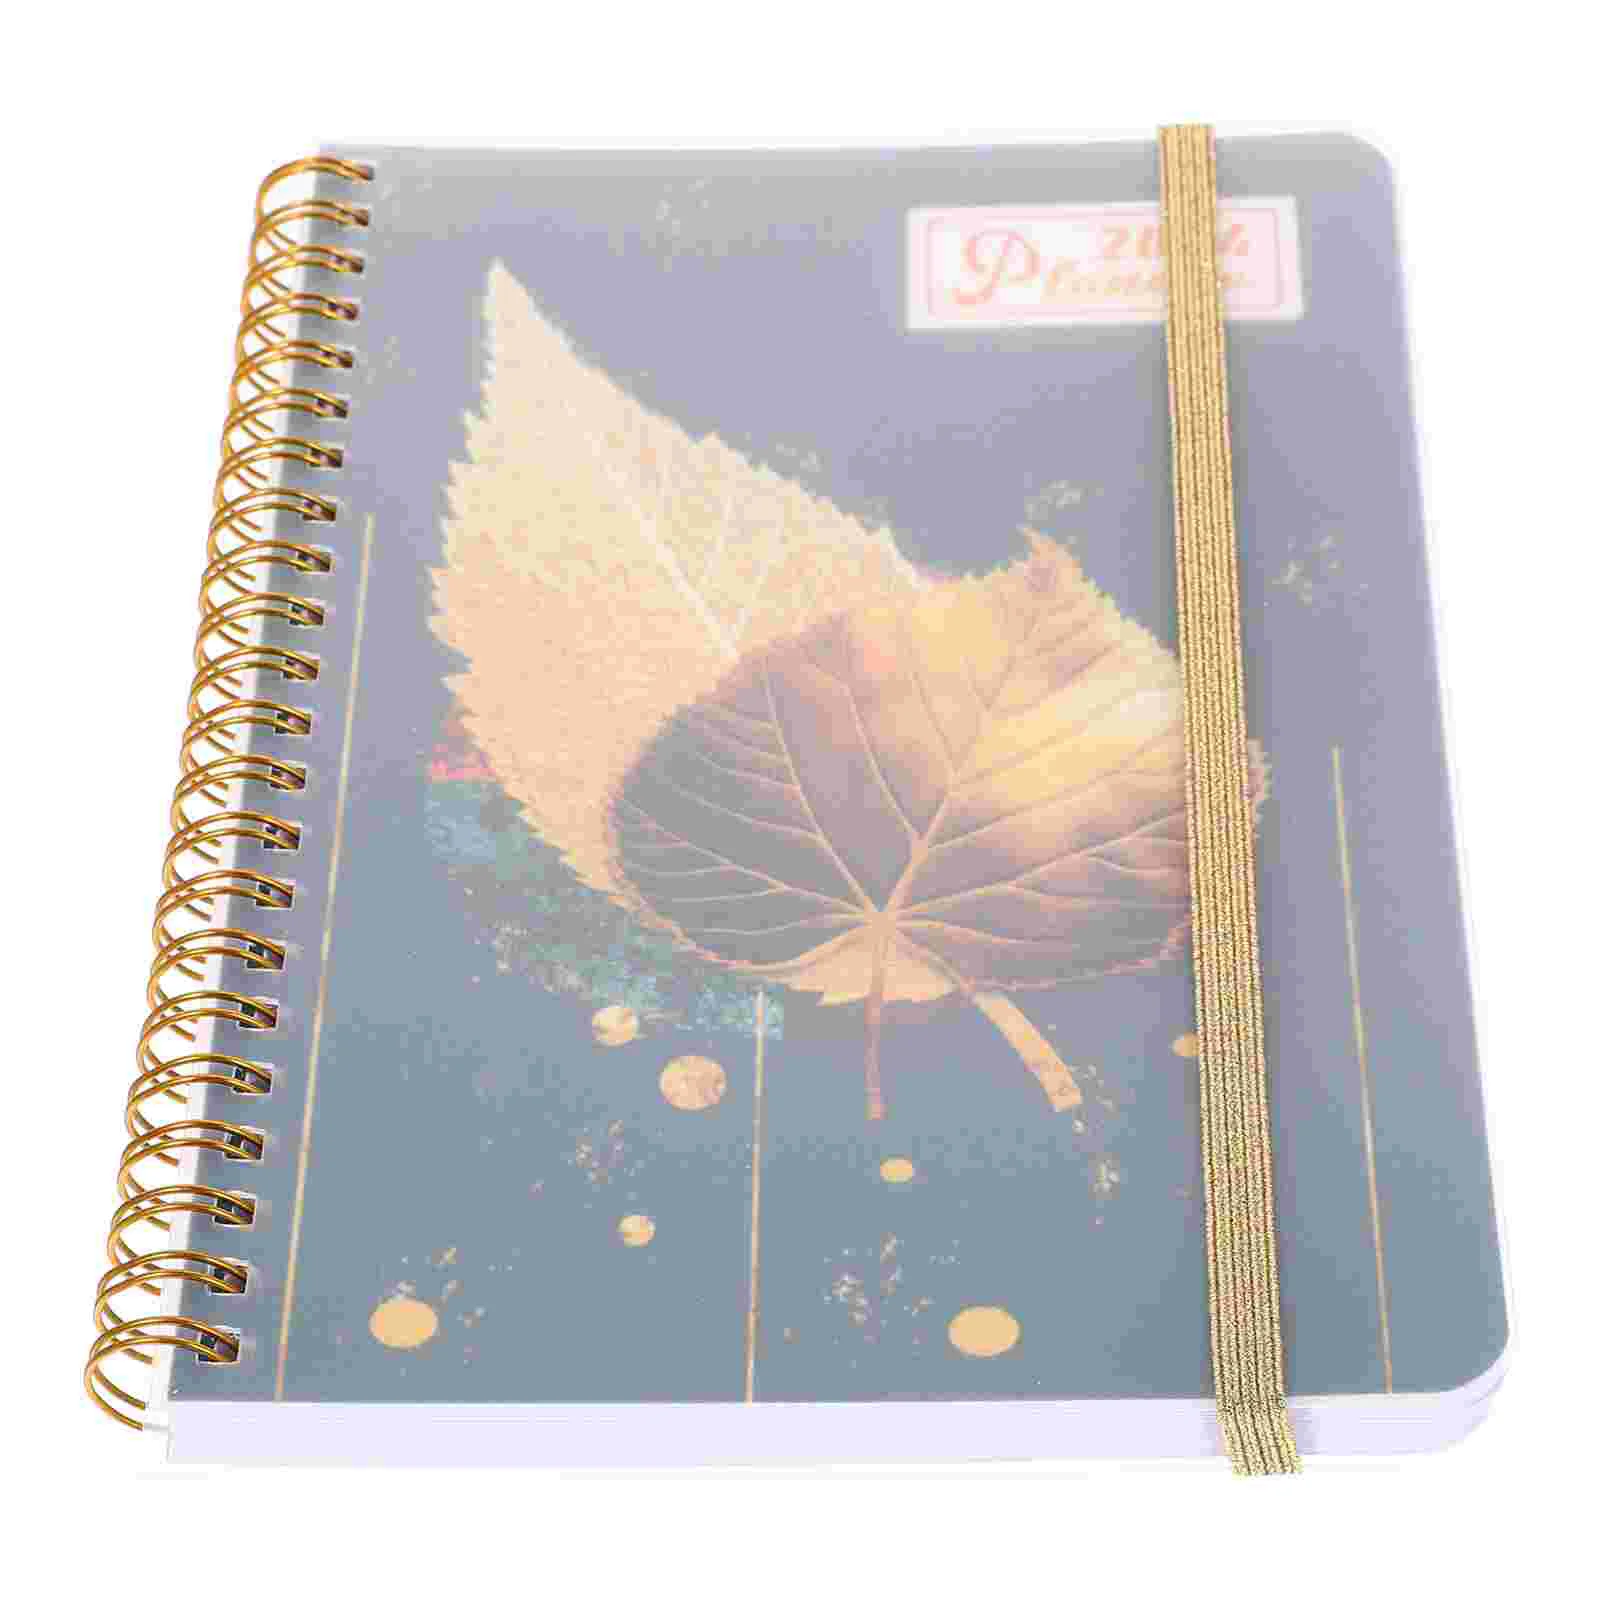 Notebook Planner Weekly To Do Planner Notebook Weekly Goal To Do List Planner Priorities Habit Page Office Organization